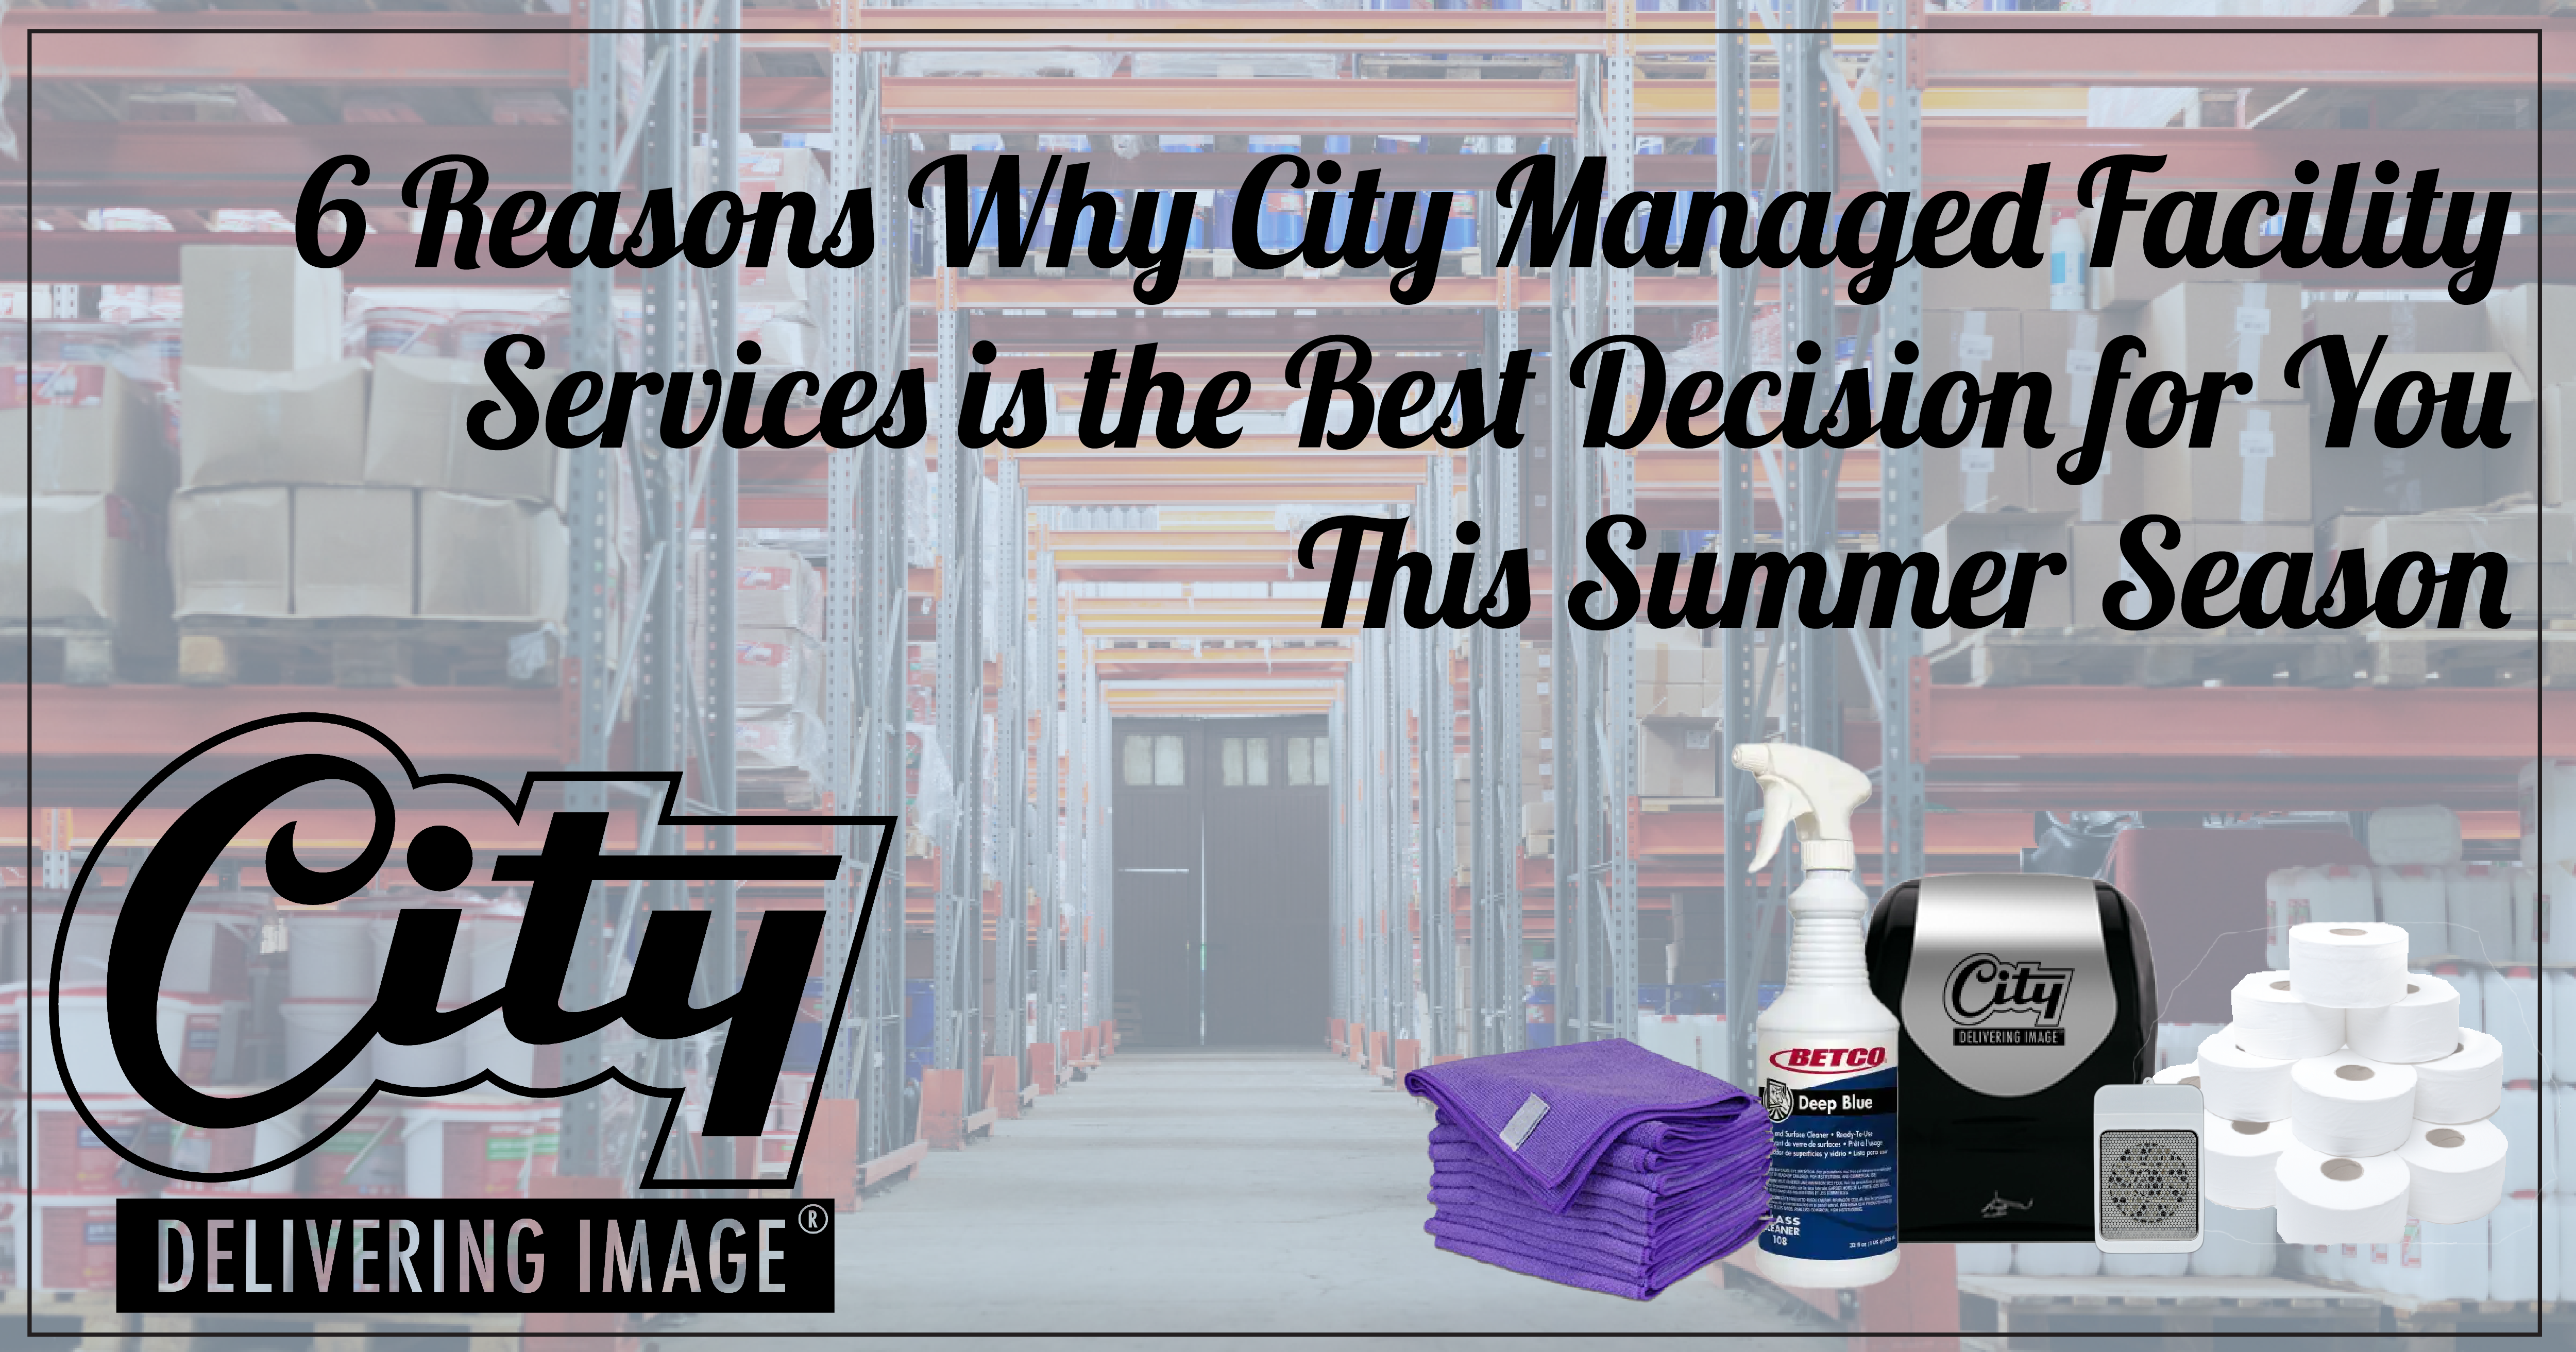 city managed facility services